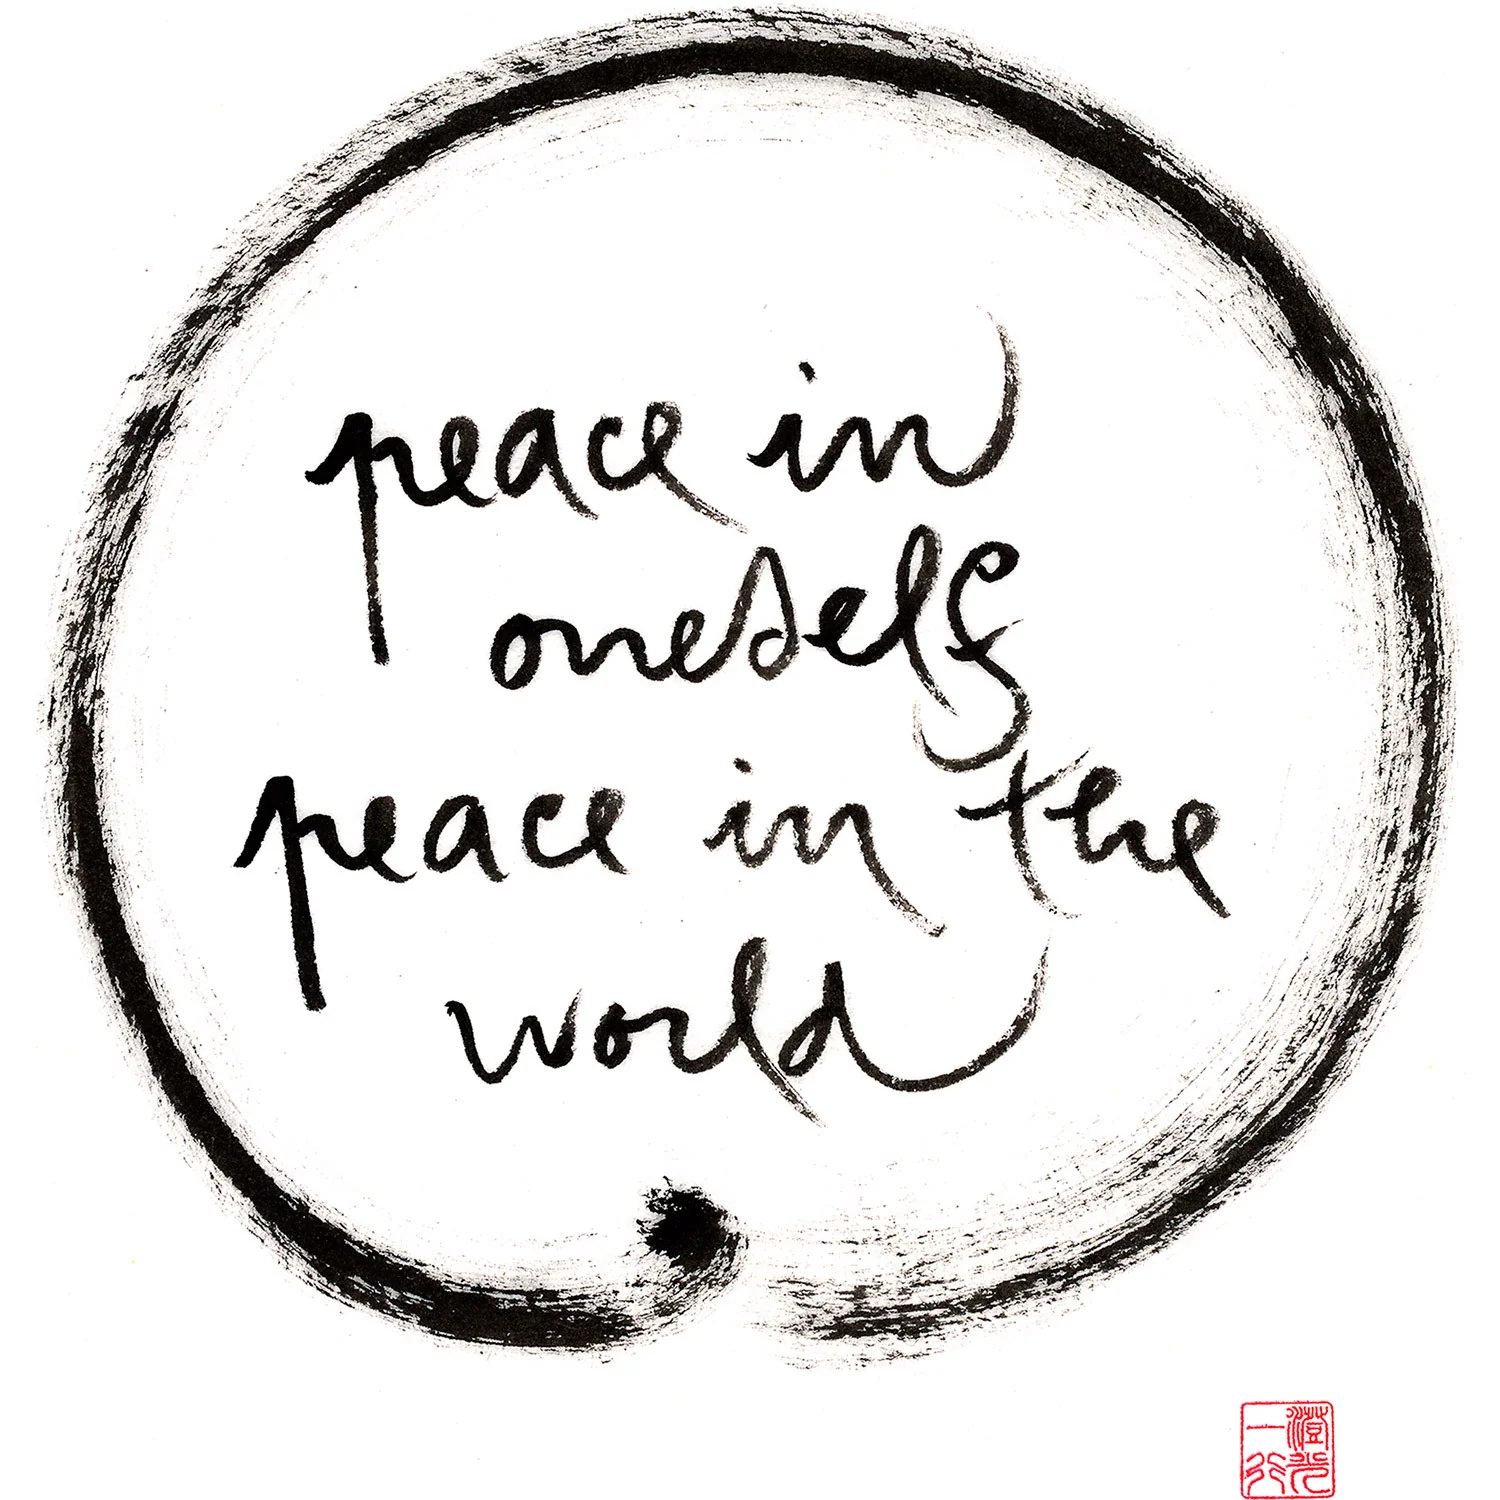 "Peace in oneself, Peace in the world" within an enso circle—calligraphy by Thich Nhat Hanh